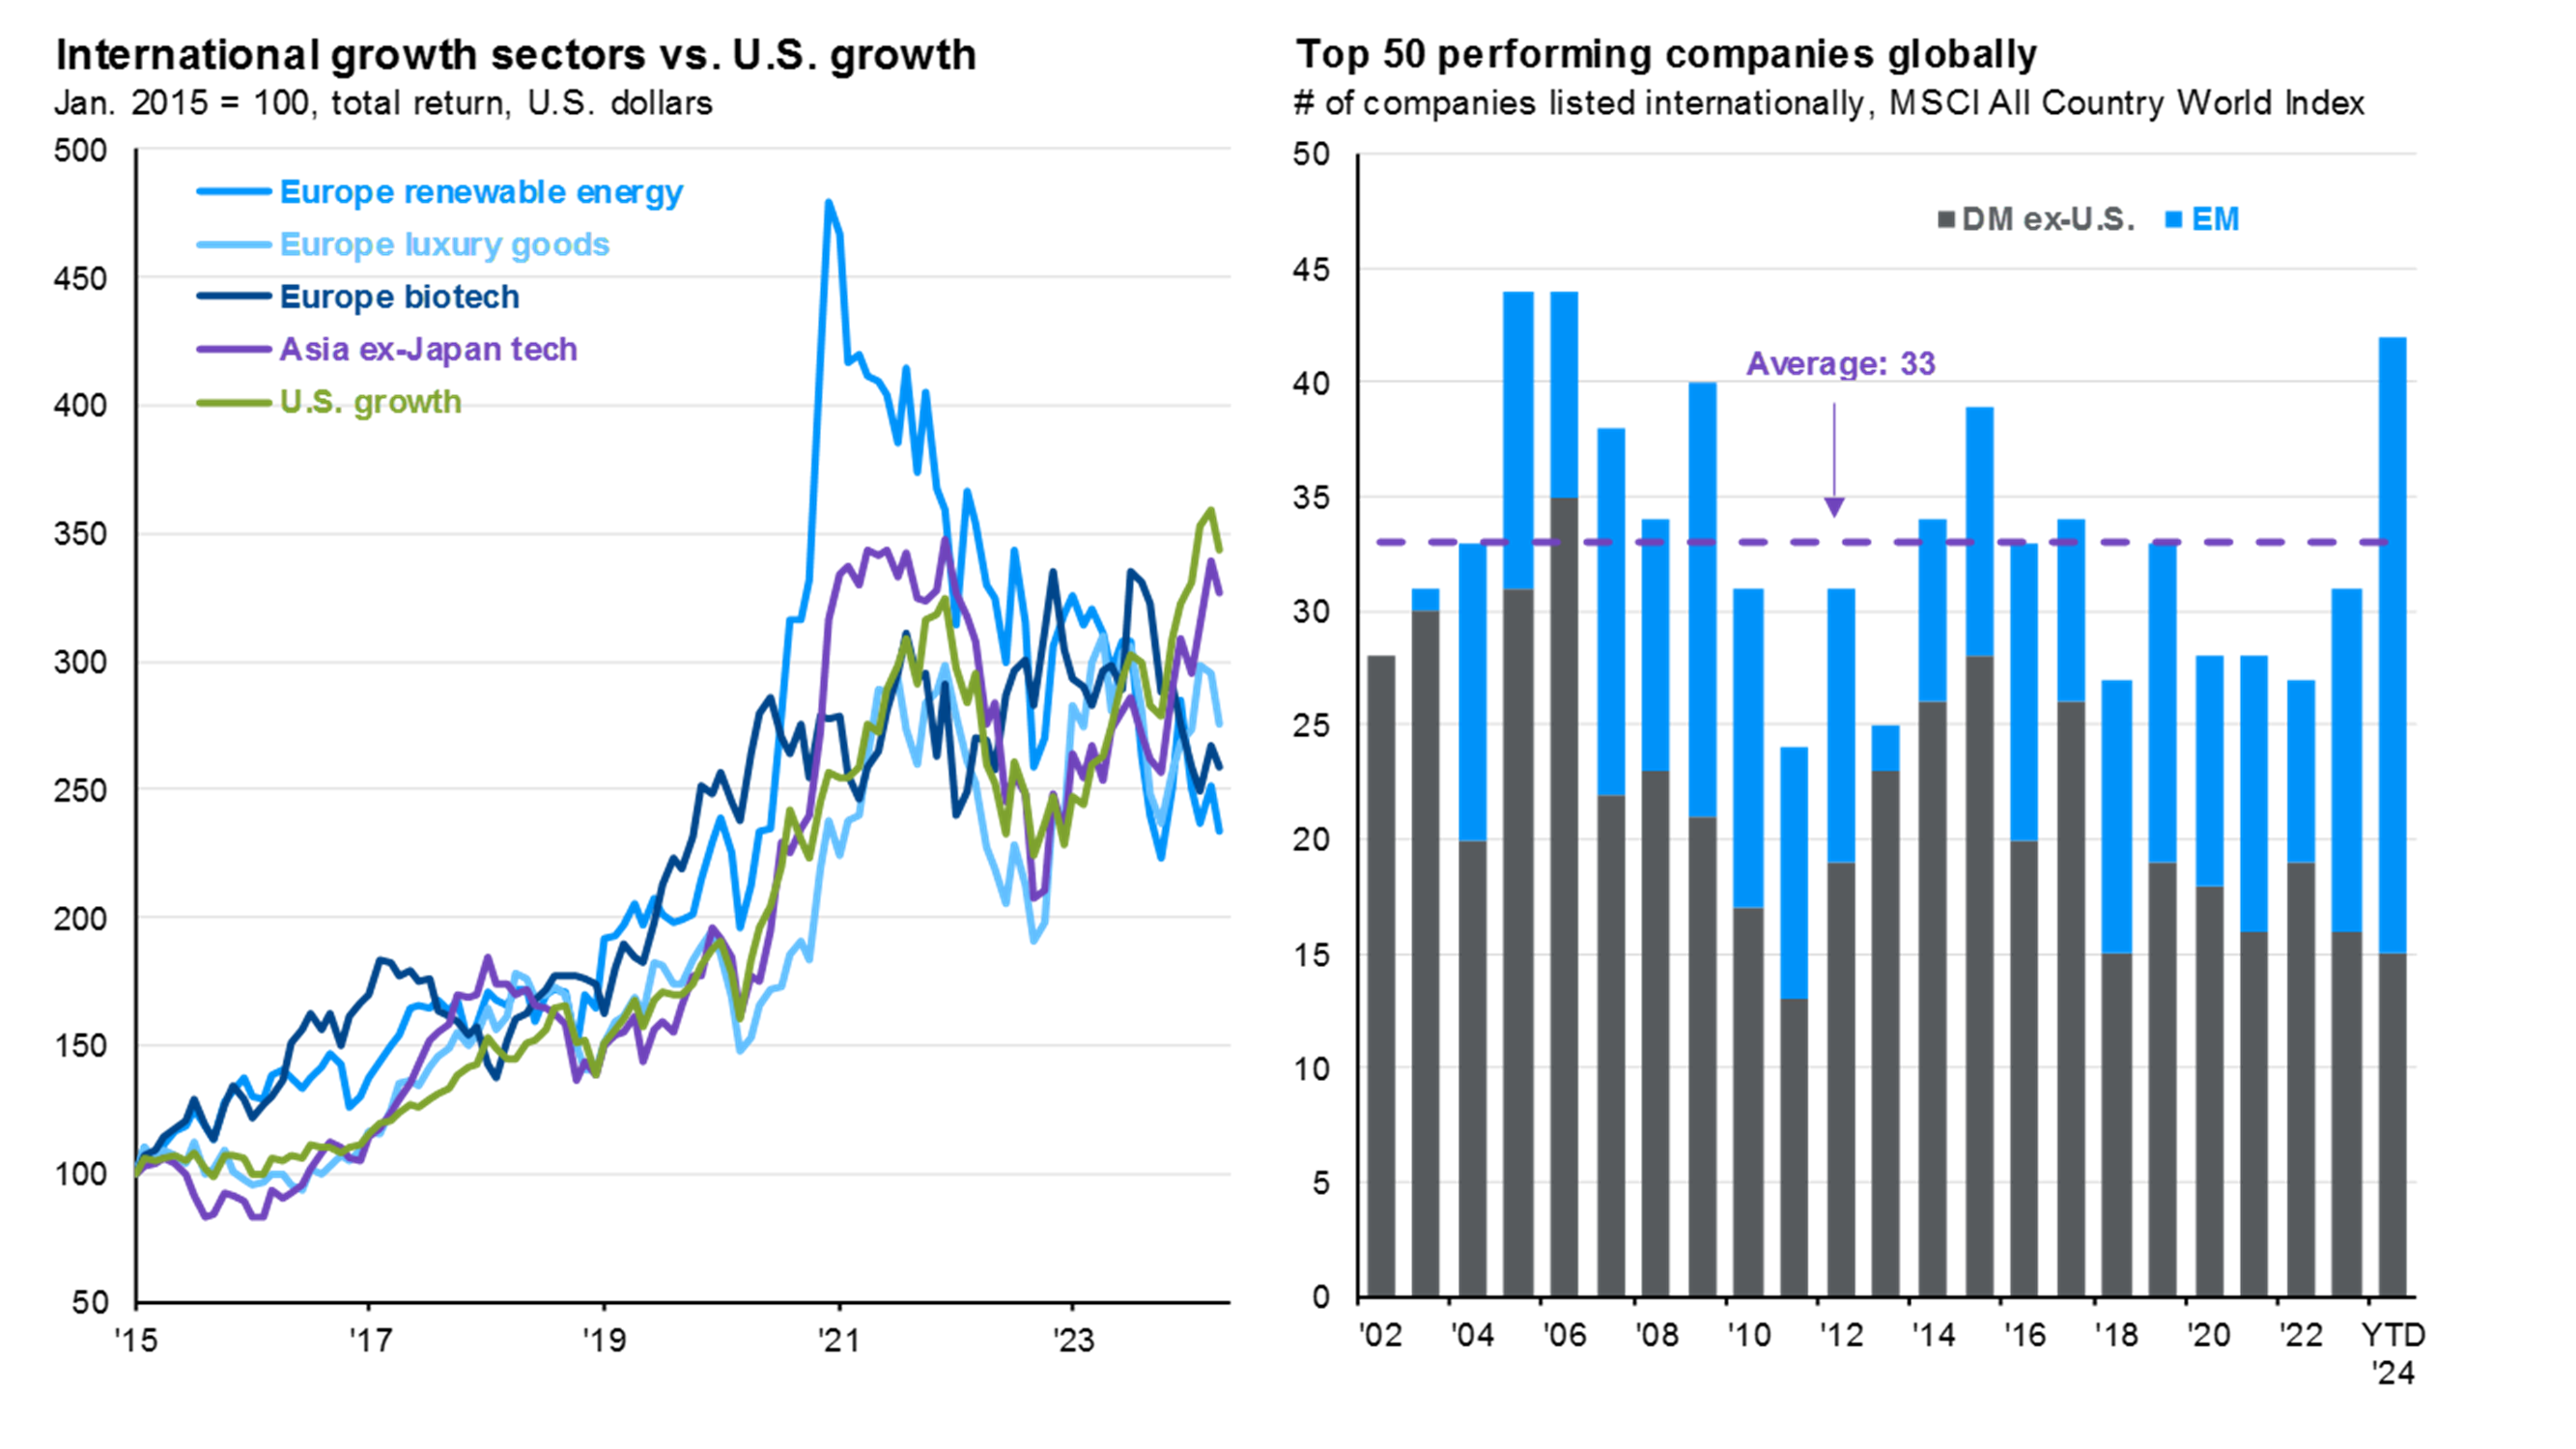 Cycles of U.S. equity outperformance